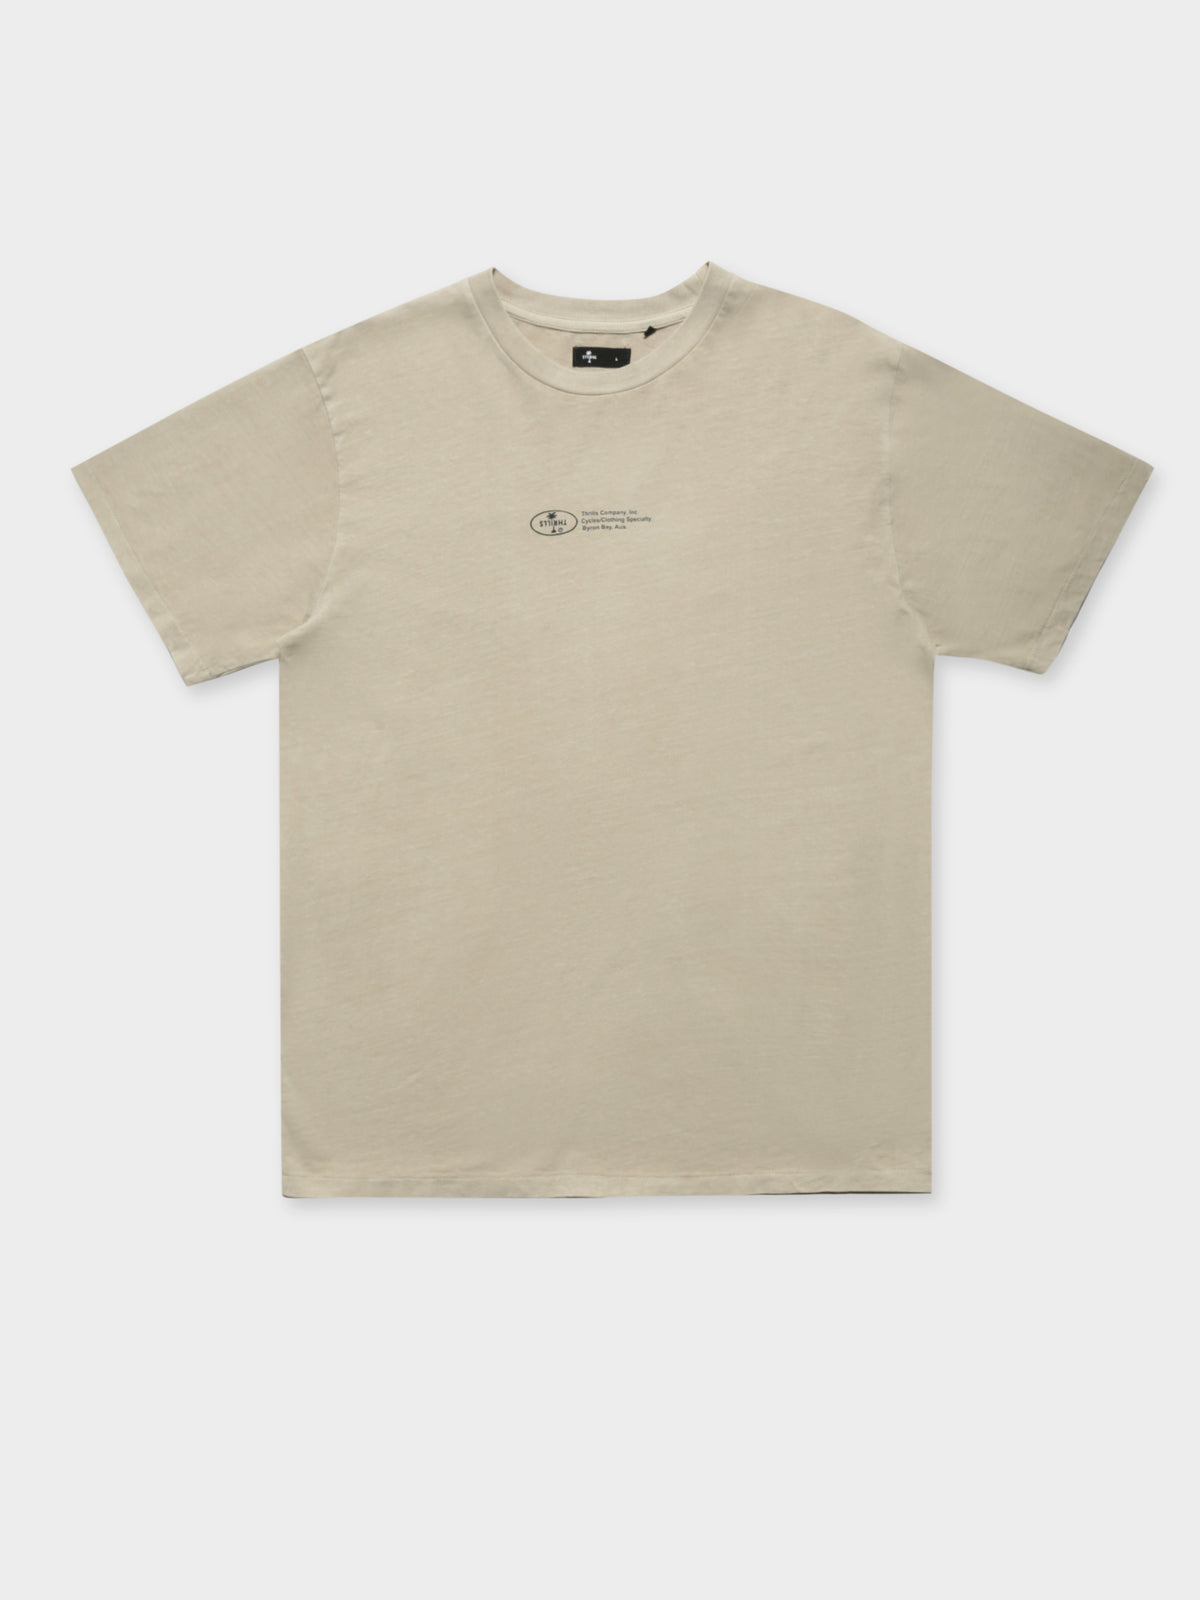 Company Alignment Merch Fit Tee in Aged Tan